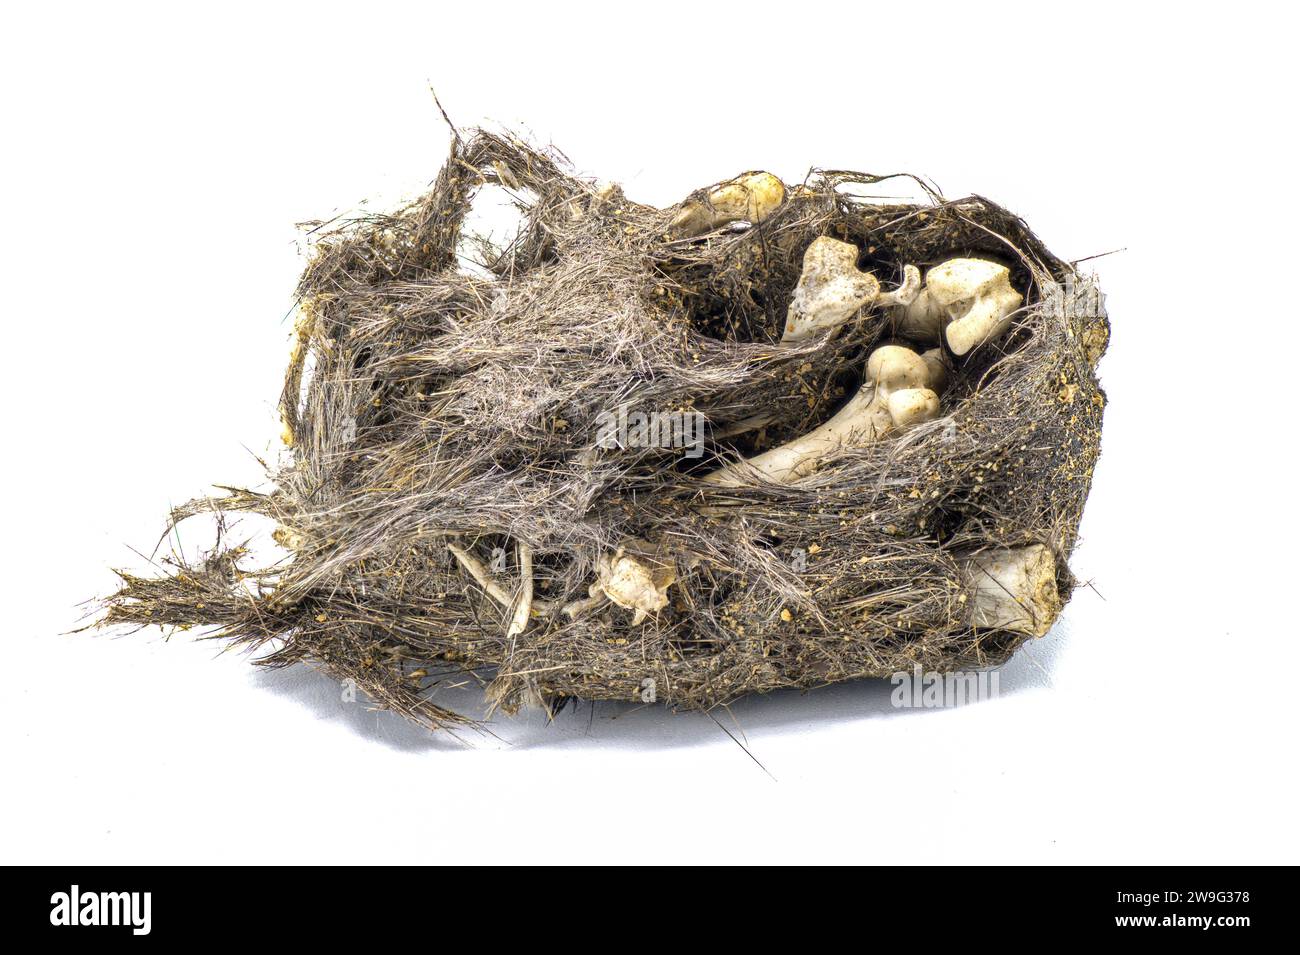 Owl pellet. An Owl's regurgitated remains of undigested prey bones likely of a mouse or small rodent.  Whole unbroken version. Isolated on white backg Stock Photo